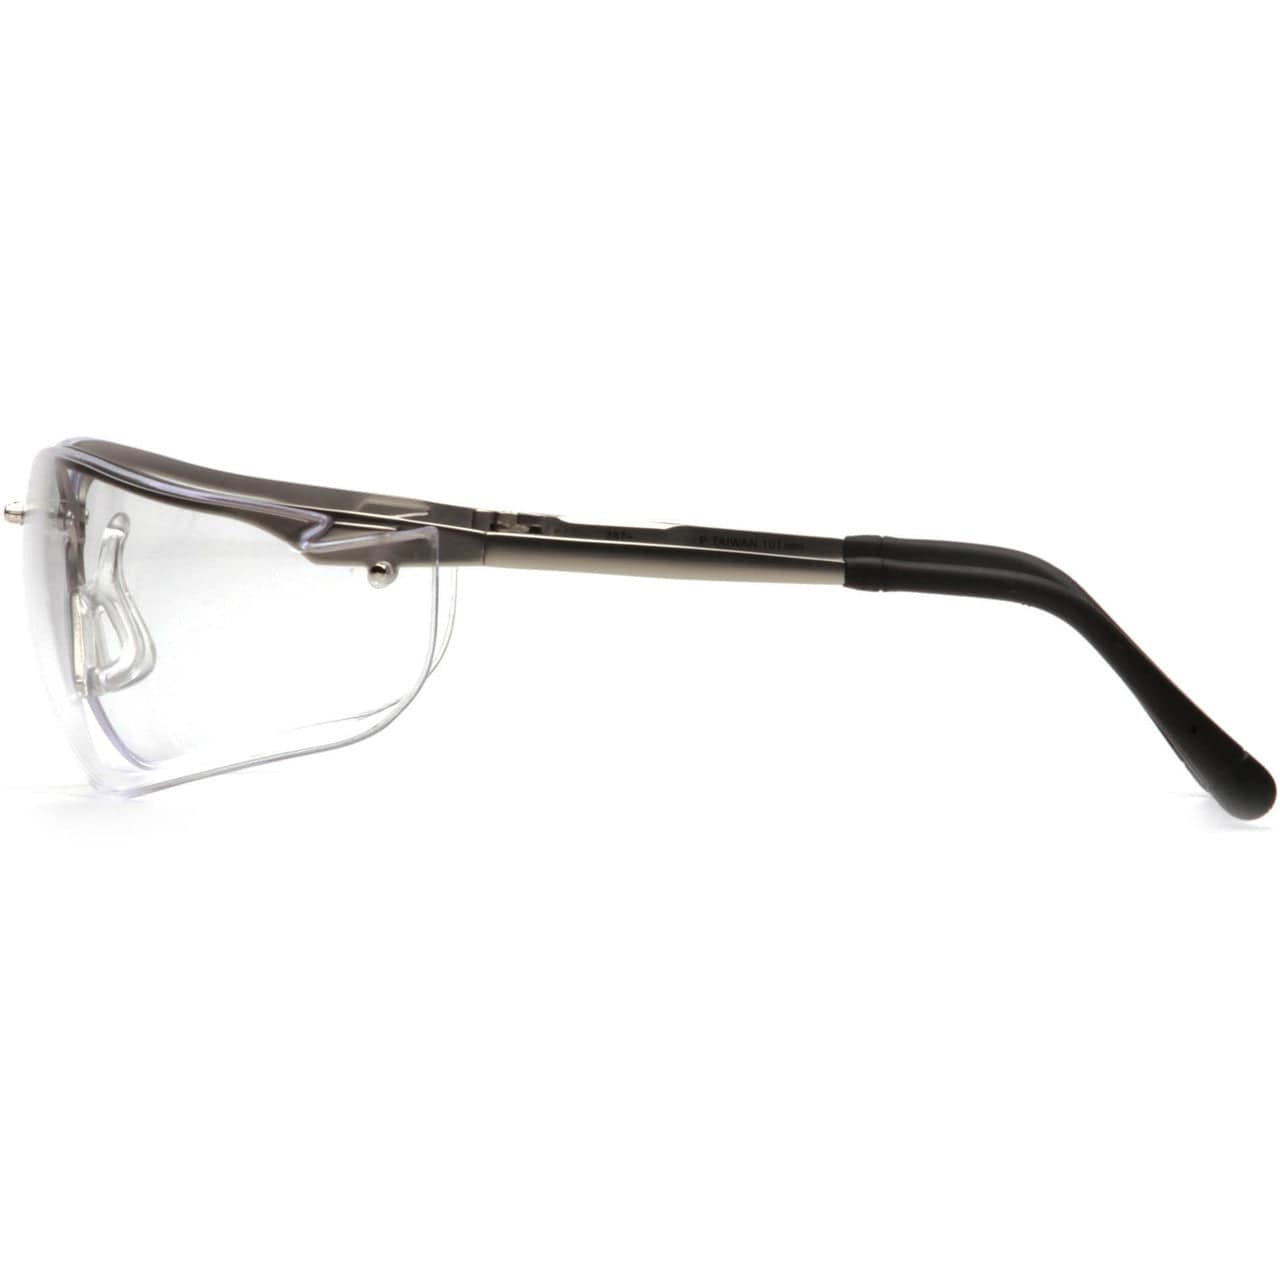 Pyramex V2 Metal Safety Glasses with Clear Lens SGM1810S Side